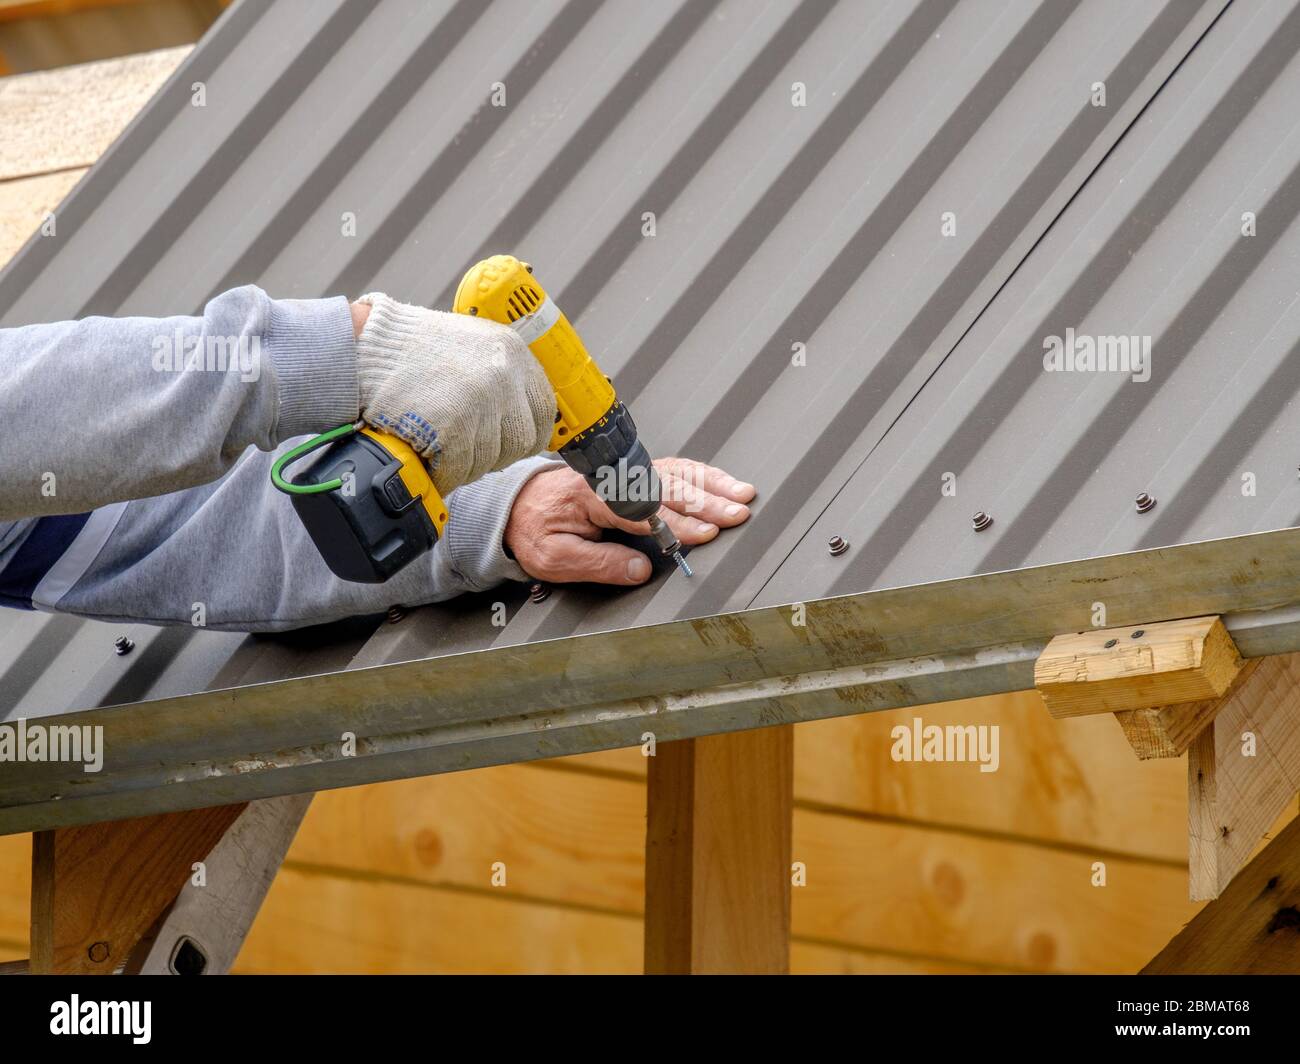 Men's Hands Work Gloves Yellow Screwdriver Screw Roofing Sheet Roof Stock  Photo by ©e.a.nekrasov 370906520